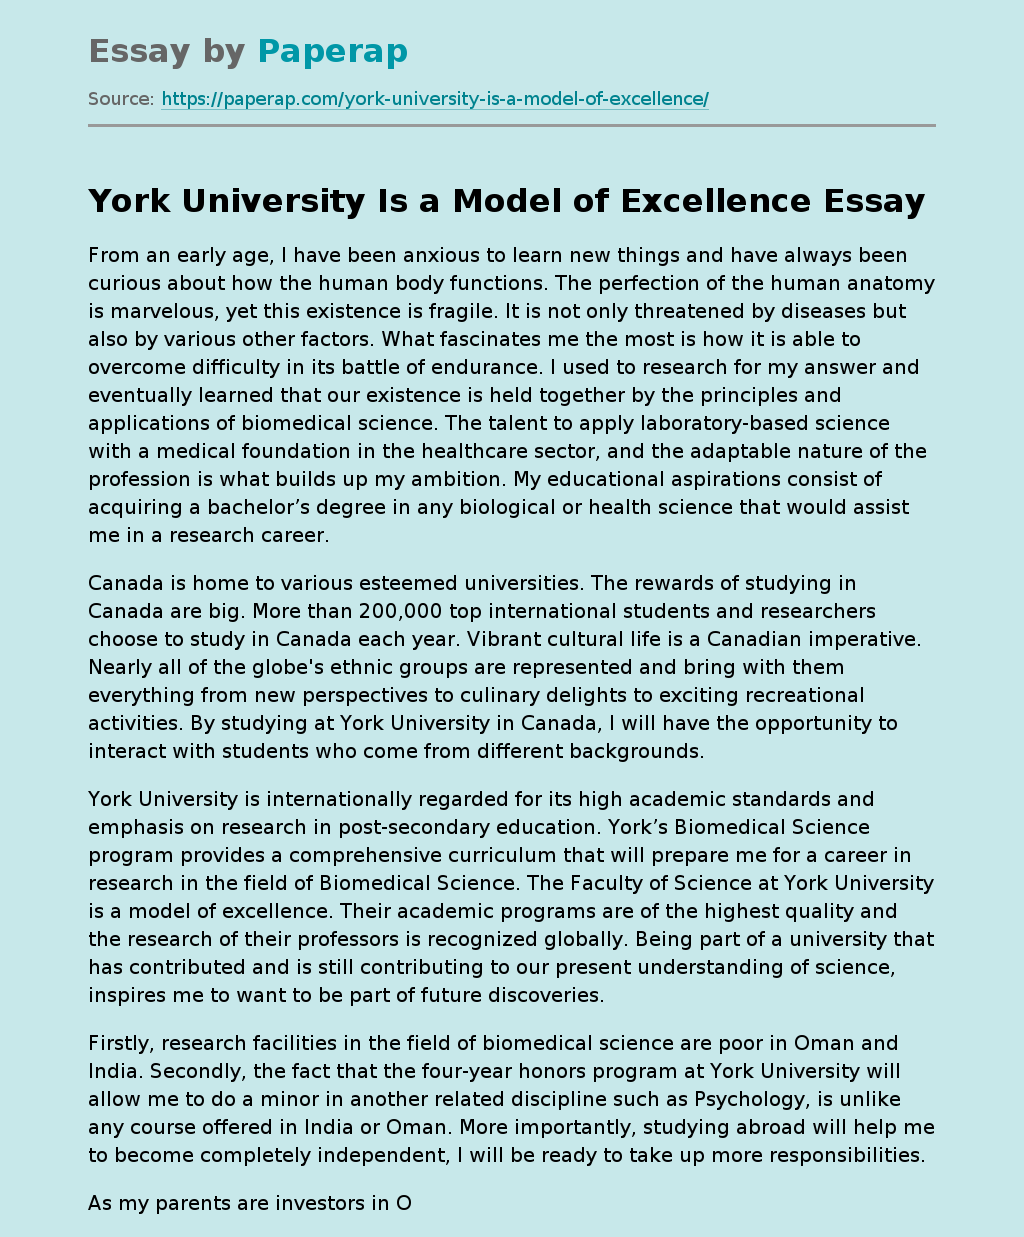 York University Is a Model of Excellence